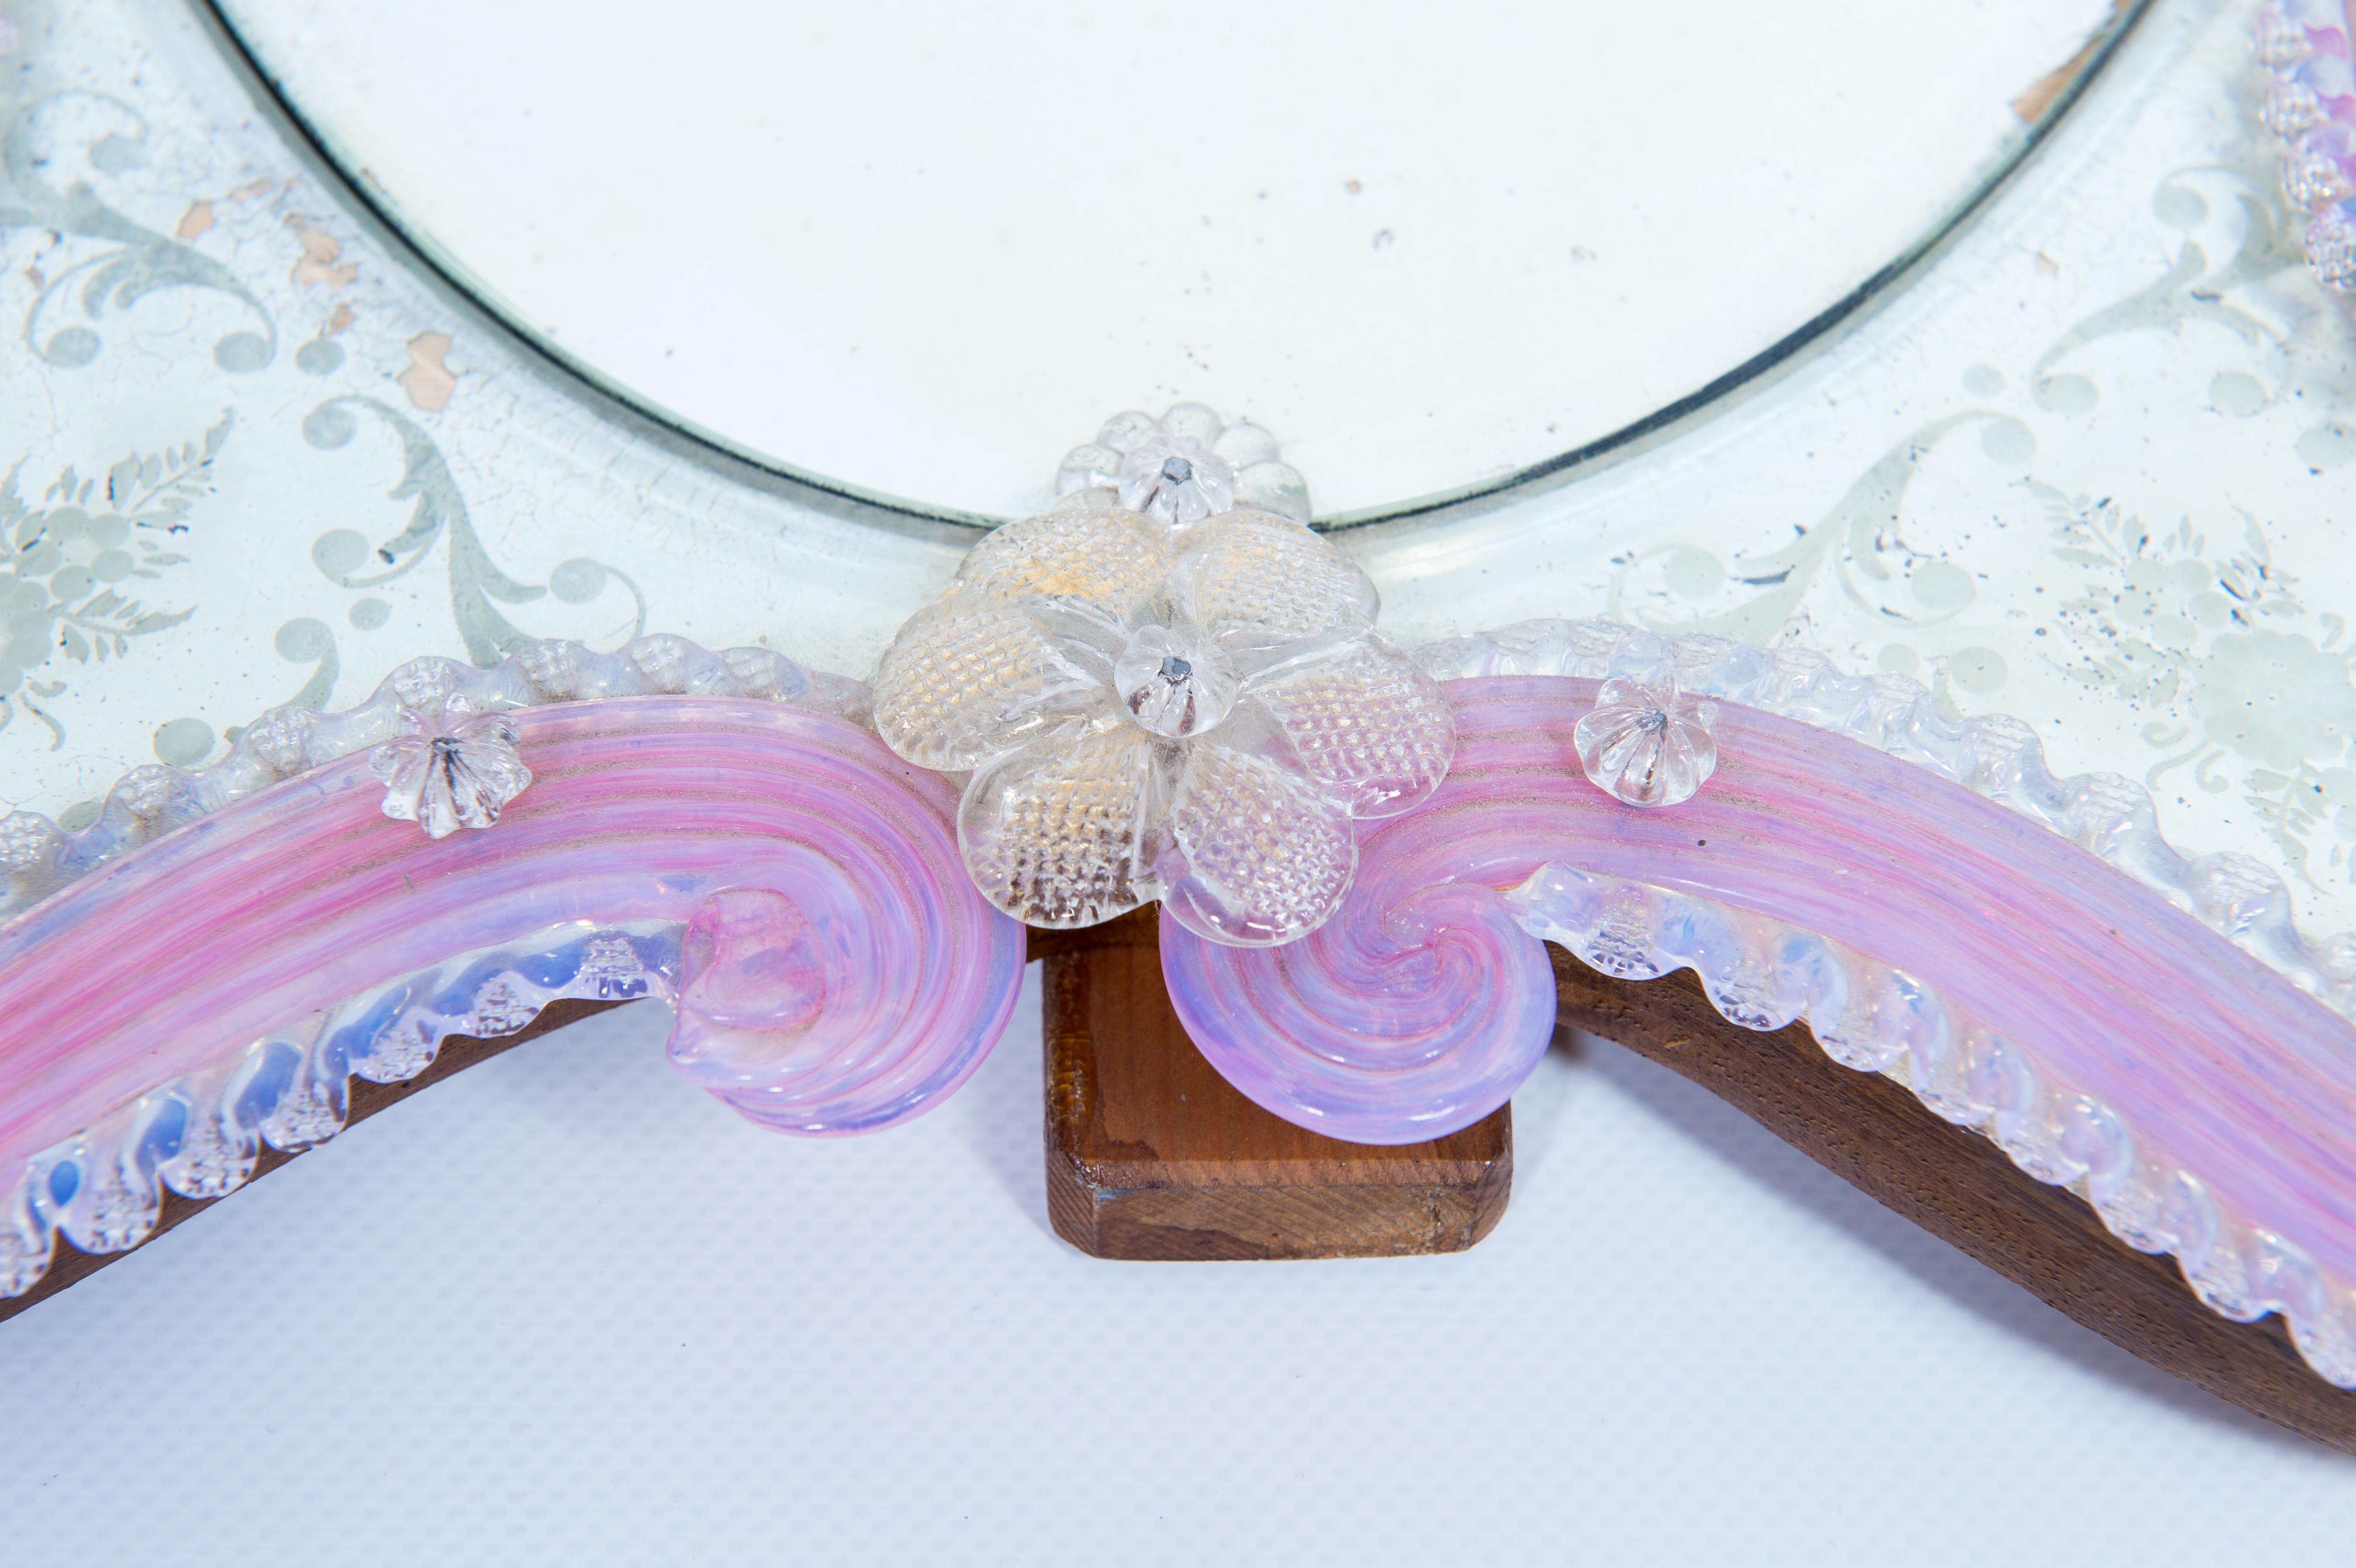 Hand-Crafted Murano Glass Table Mirror with Engravings and Pink Floral Decoration 1950s Italy For Sale